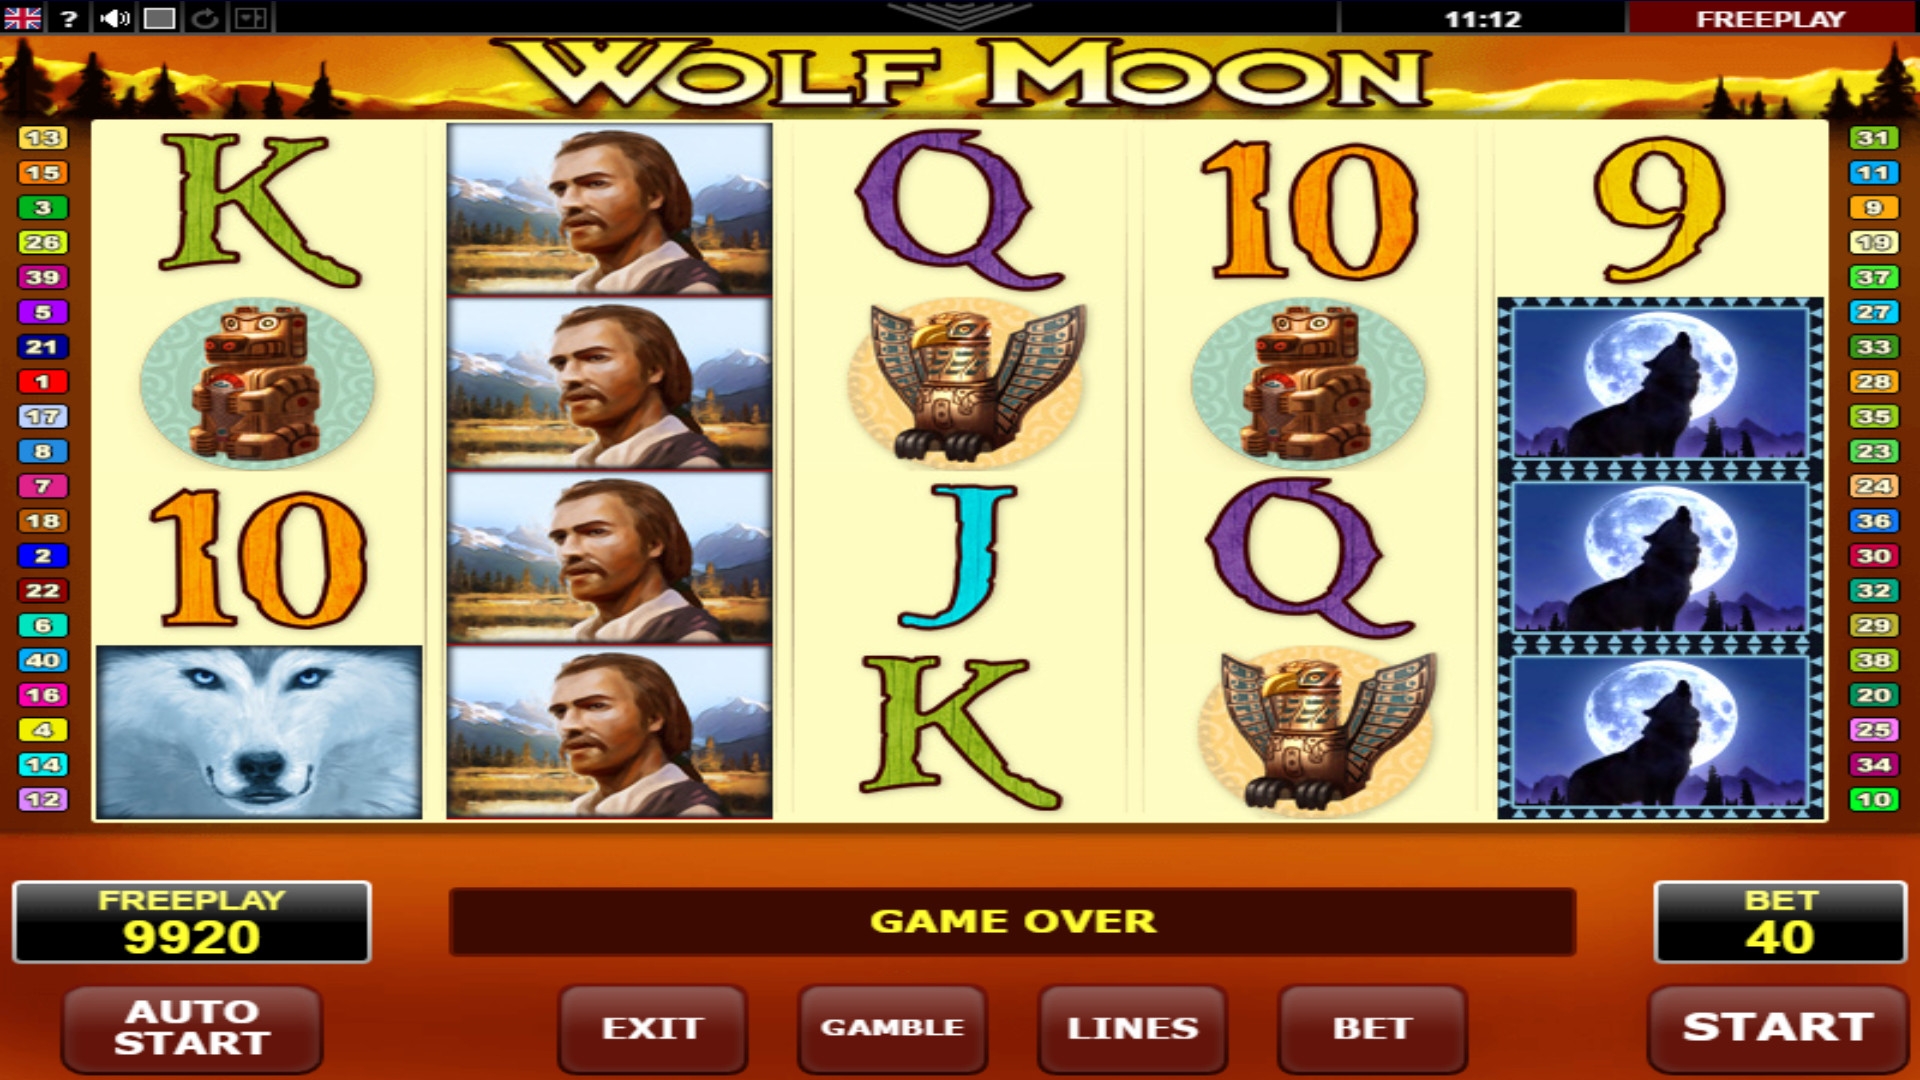 Wolf Moon (Wolf Moon) from category Slots